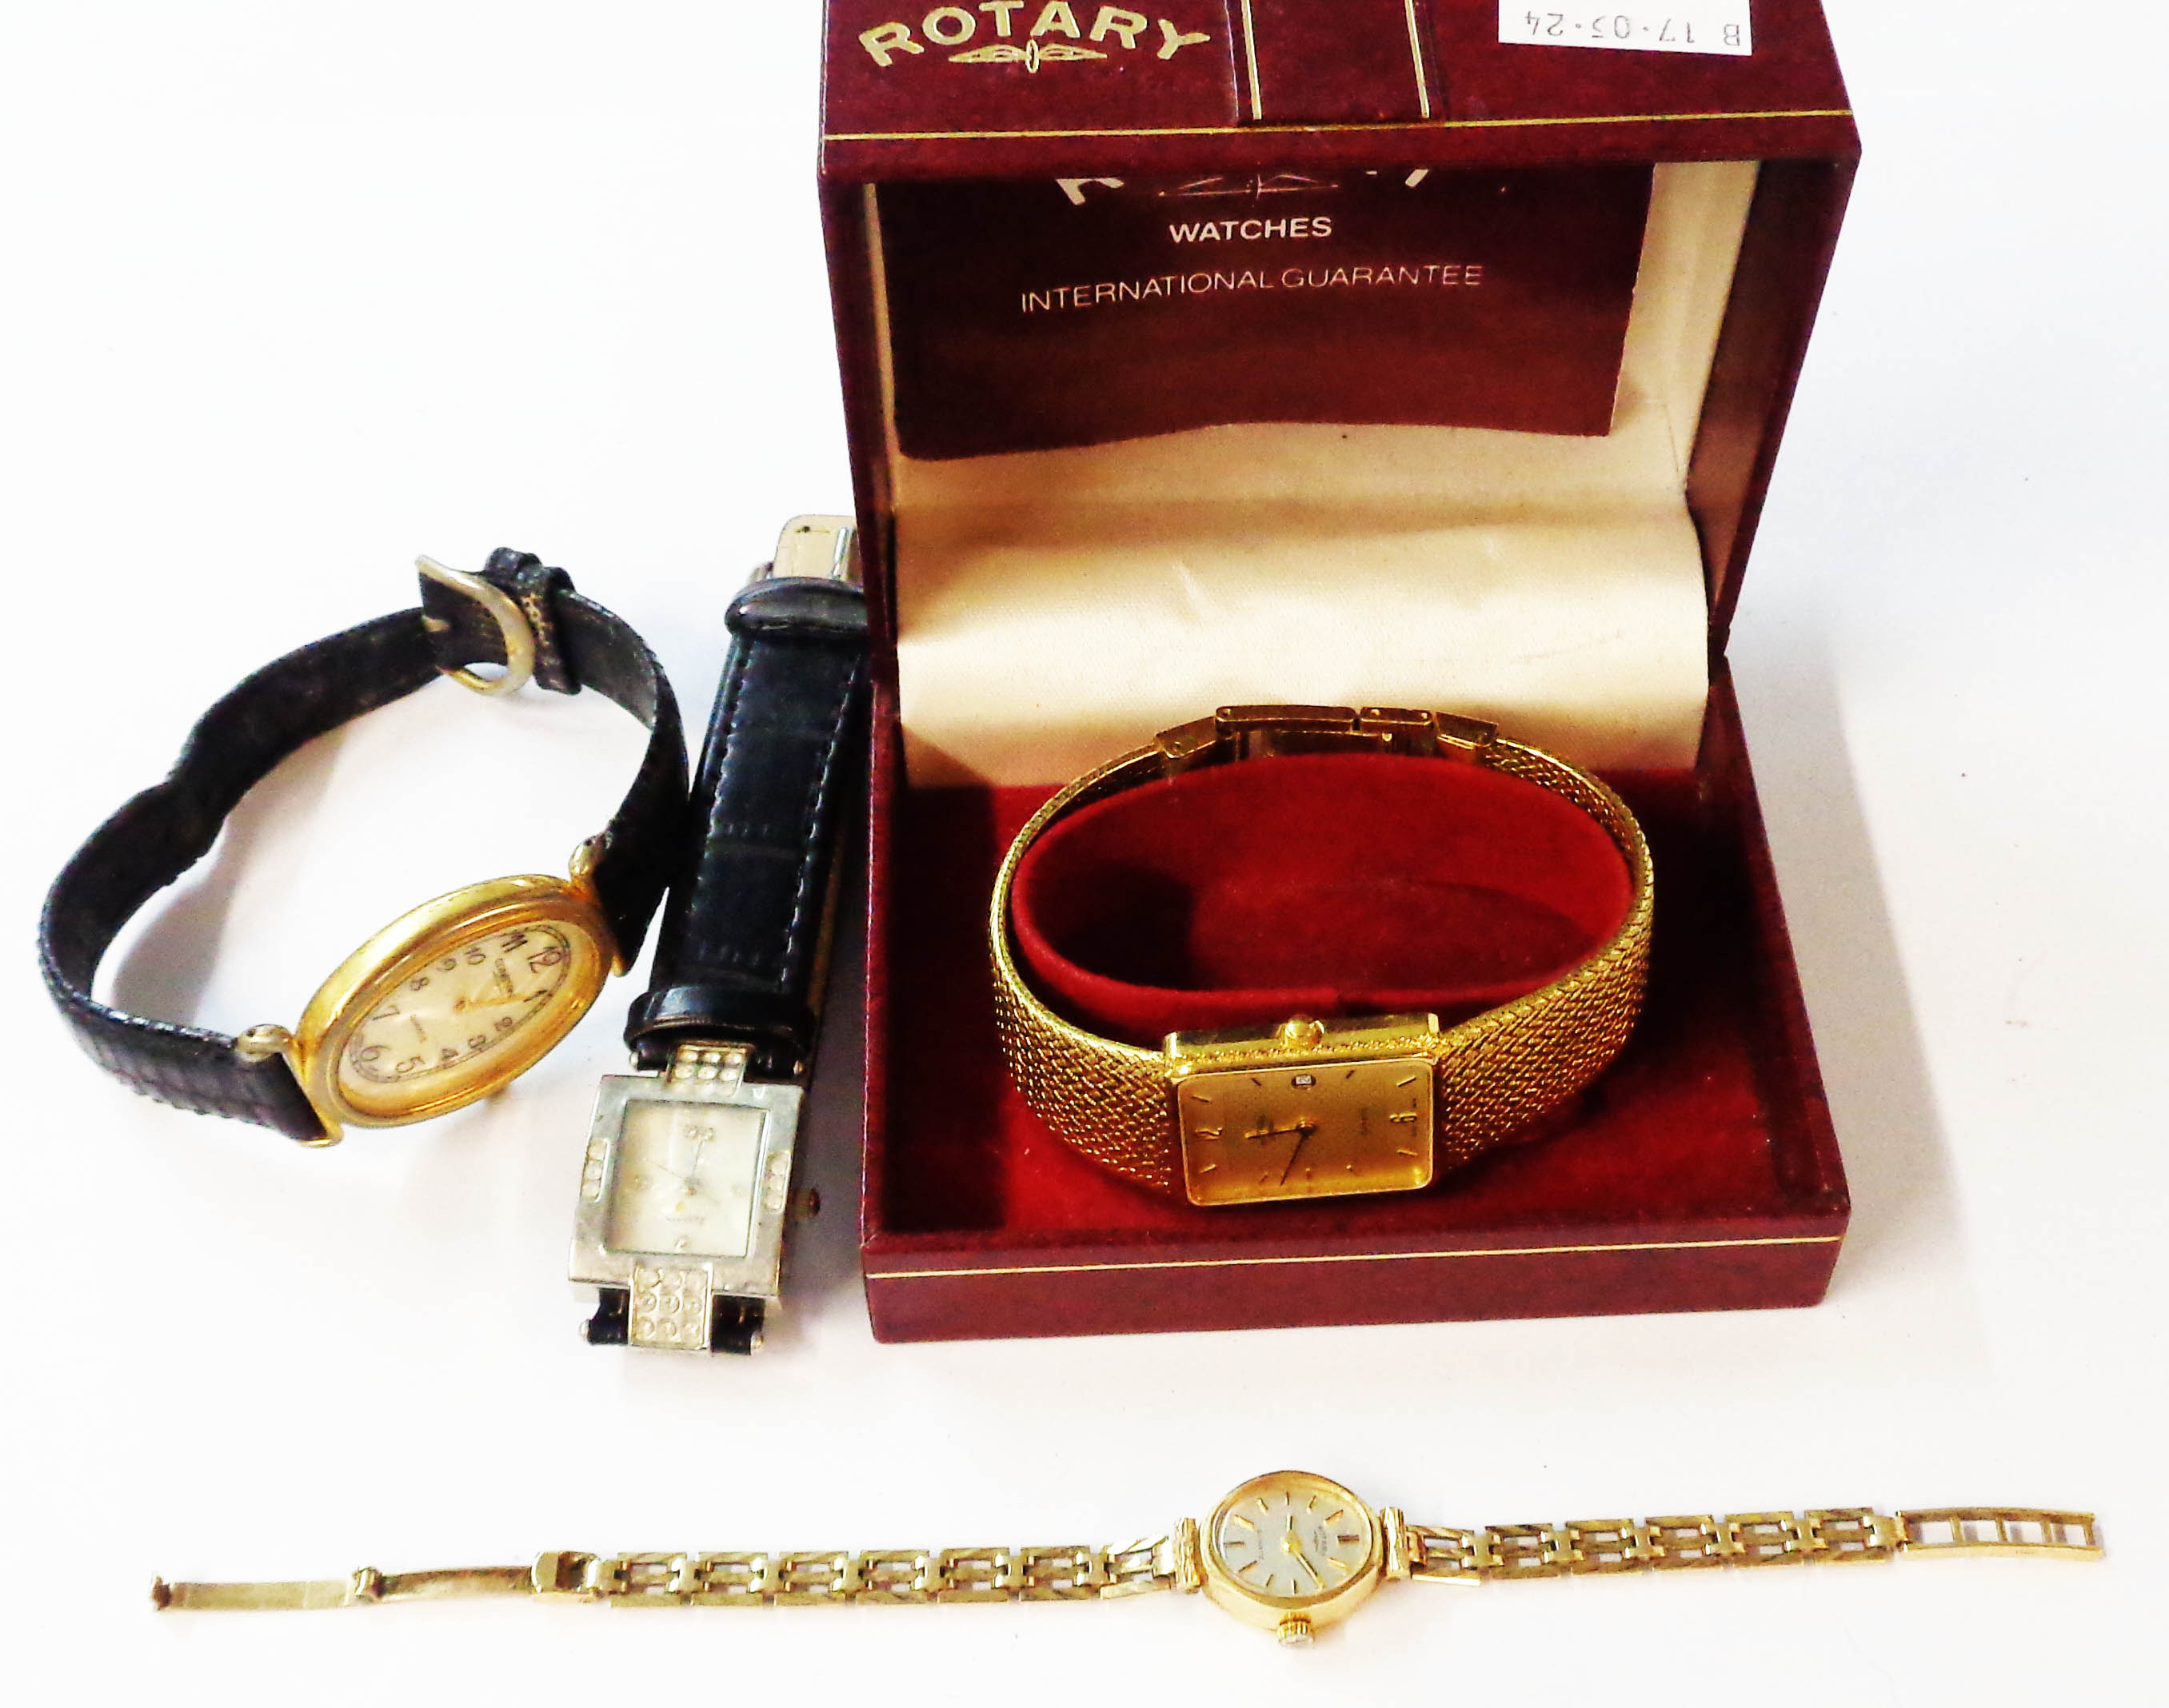 A 375 (9ct.) gold Rotary quartz lady's wristwatch with 9ct. bracelet - sold with a boxed Rotary